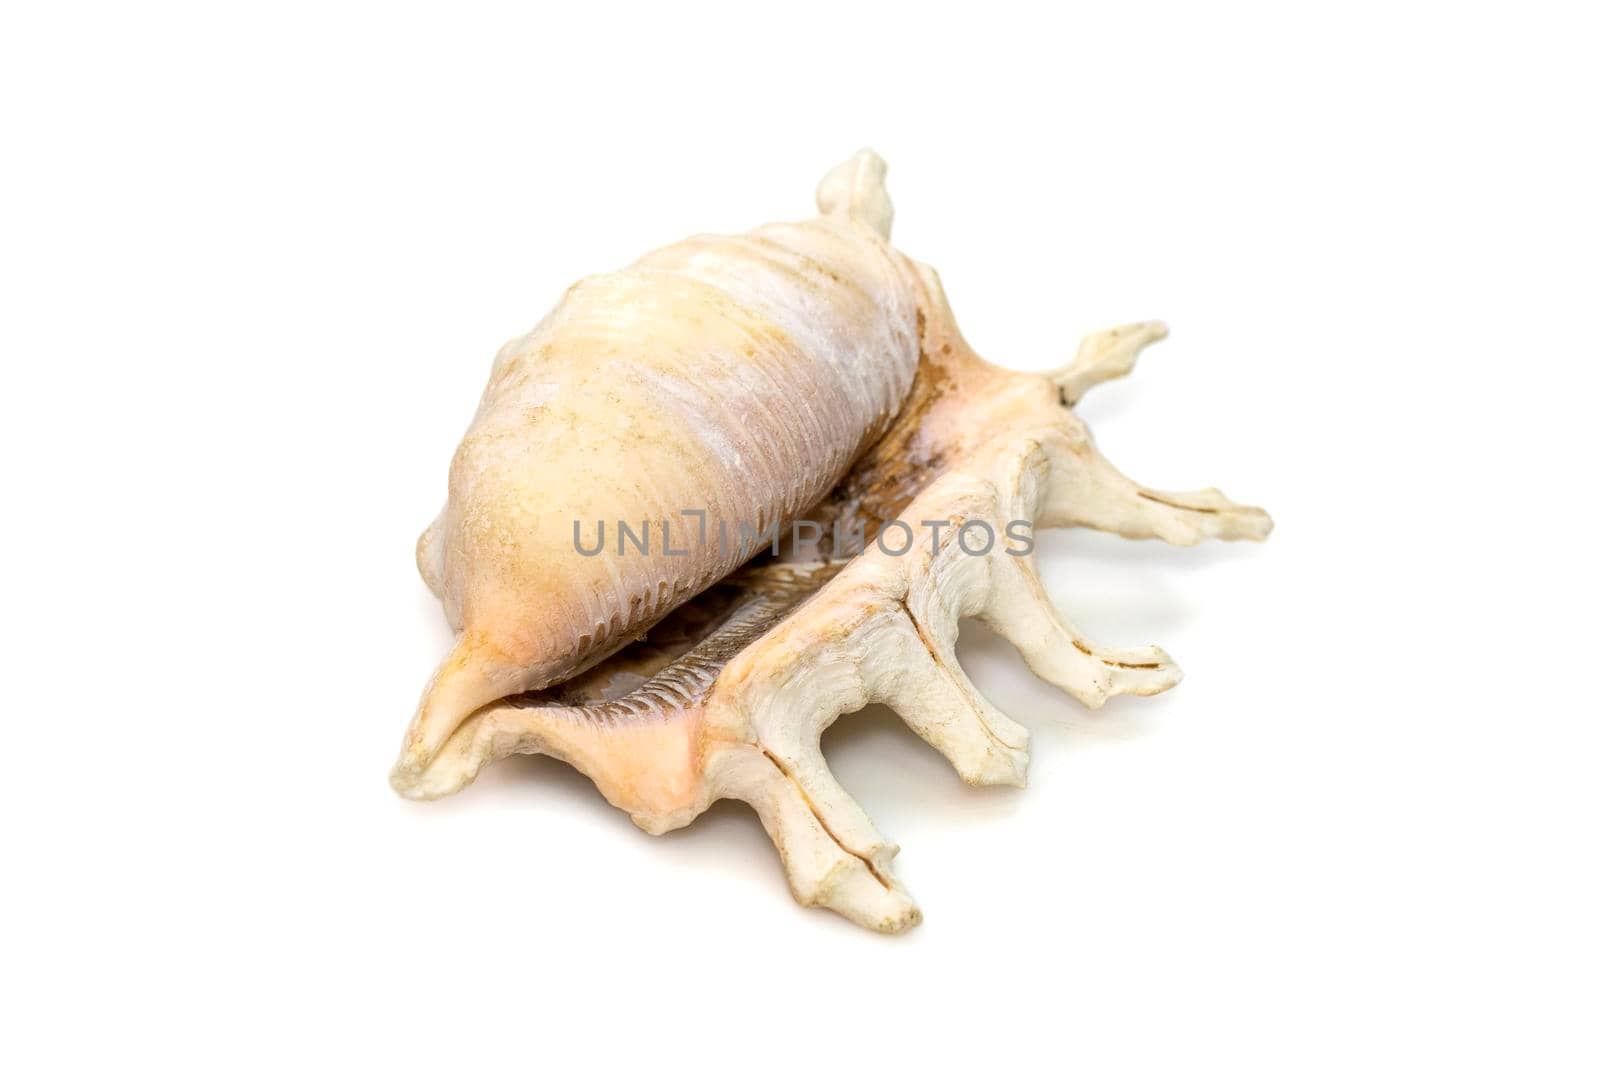 Image of lambis scorpius sea shell, common name the scorpion conch or scorpion spider conch, is a species of large sea snail, a marine gastropod mollusk in the family Strombidae, the true conchs on a white background. Undersea Animals.